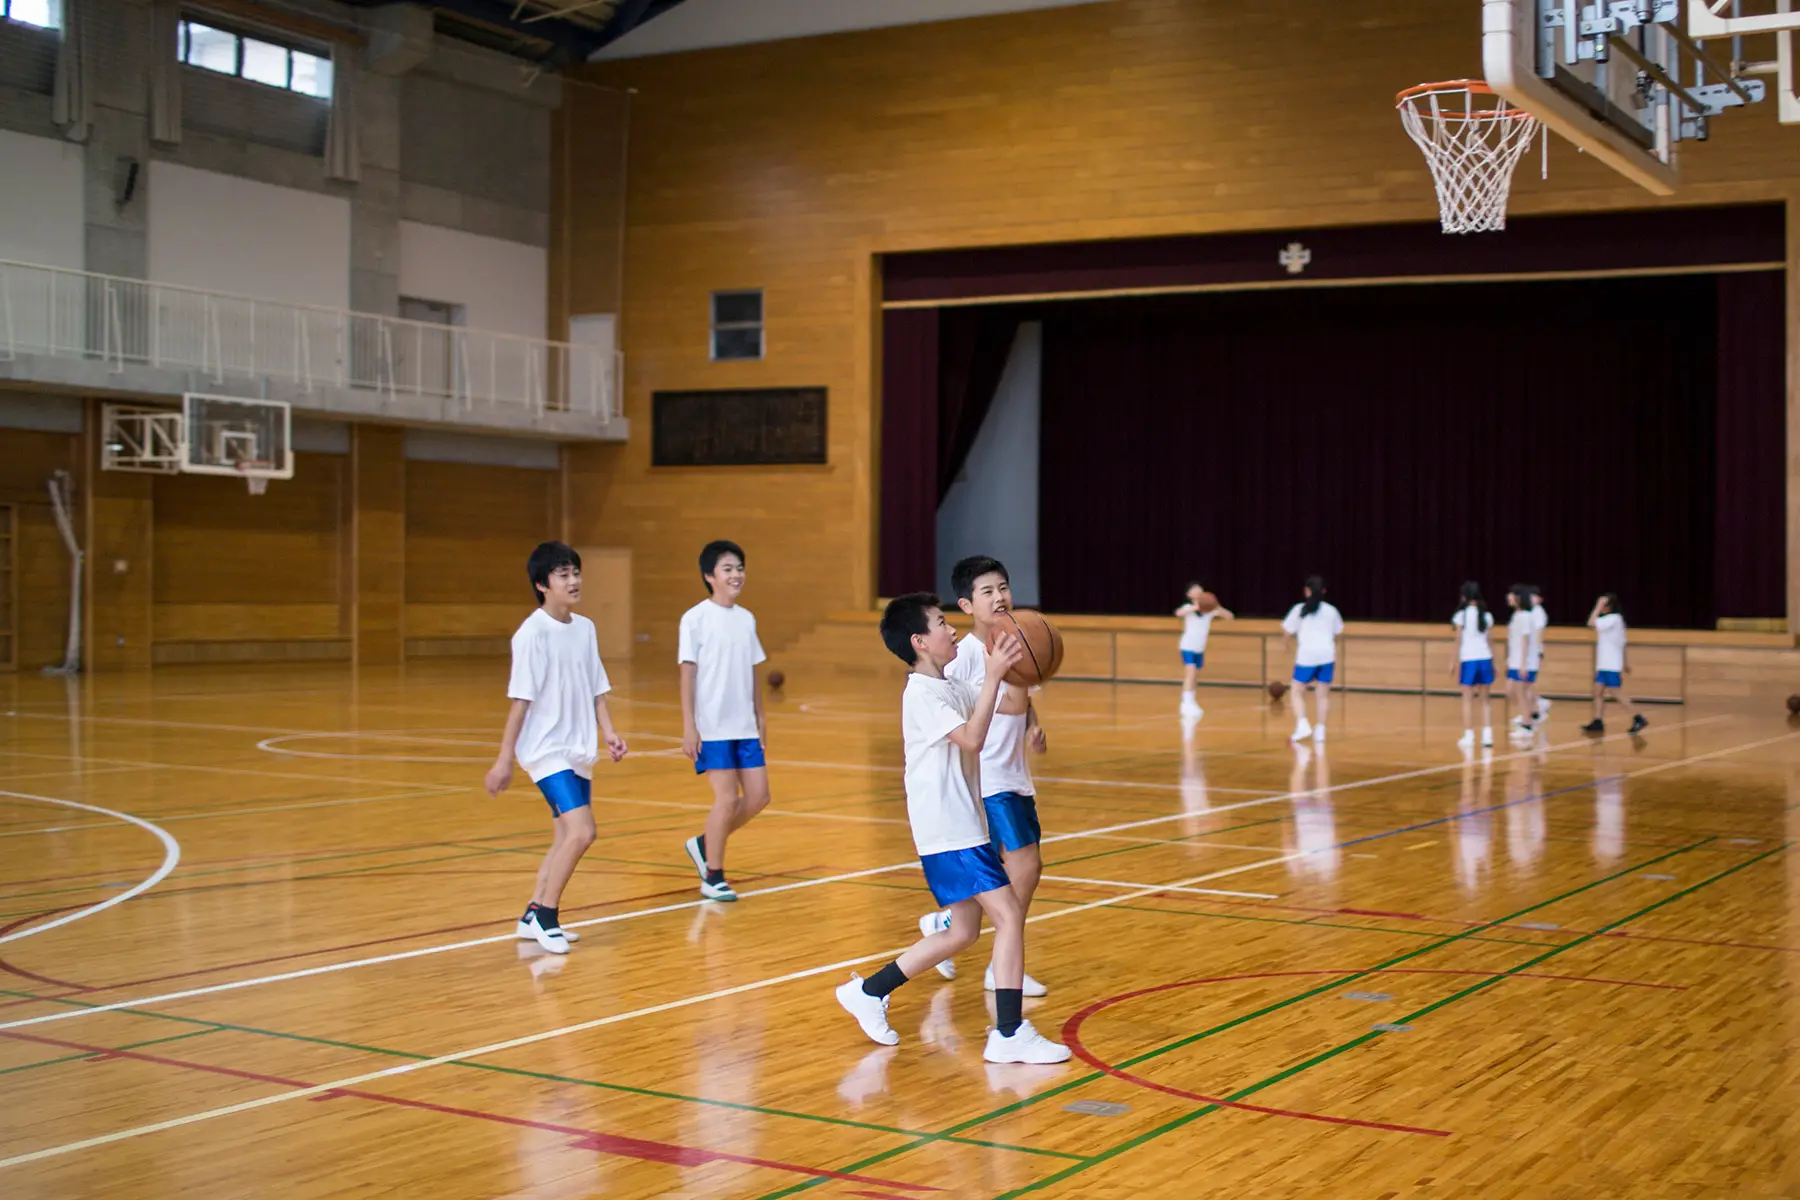 Teenagers playing basketball in a gymnasium